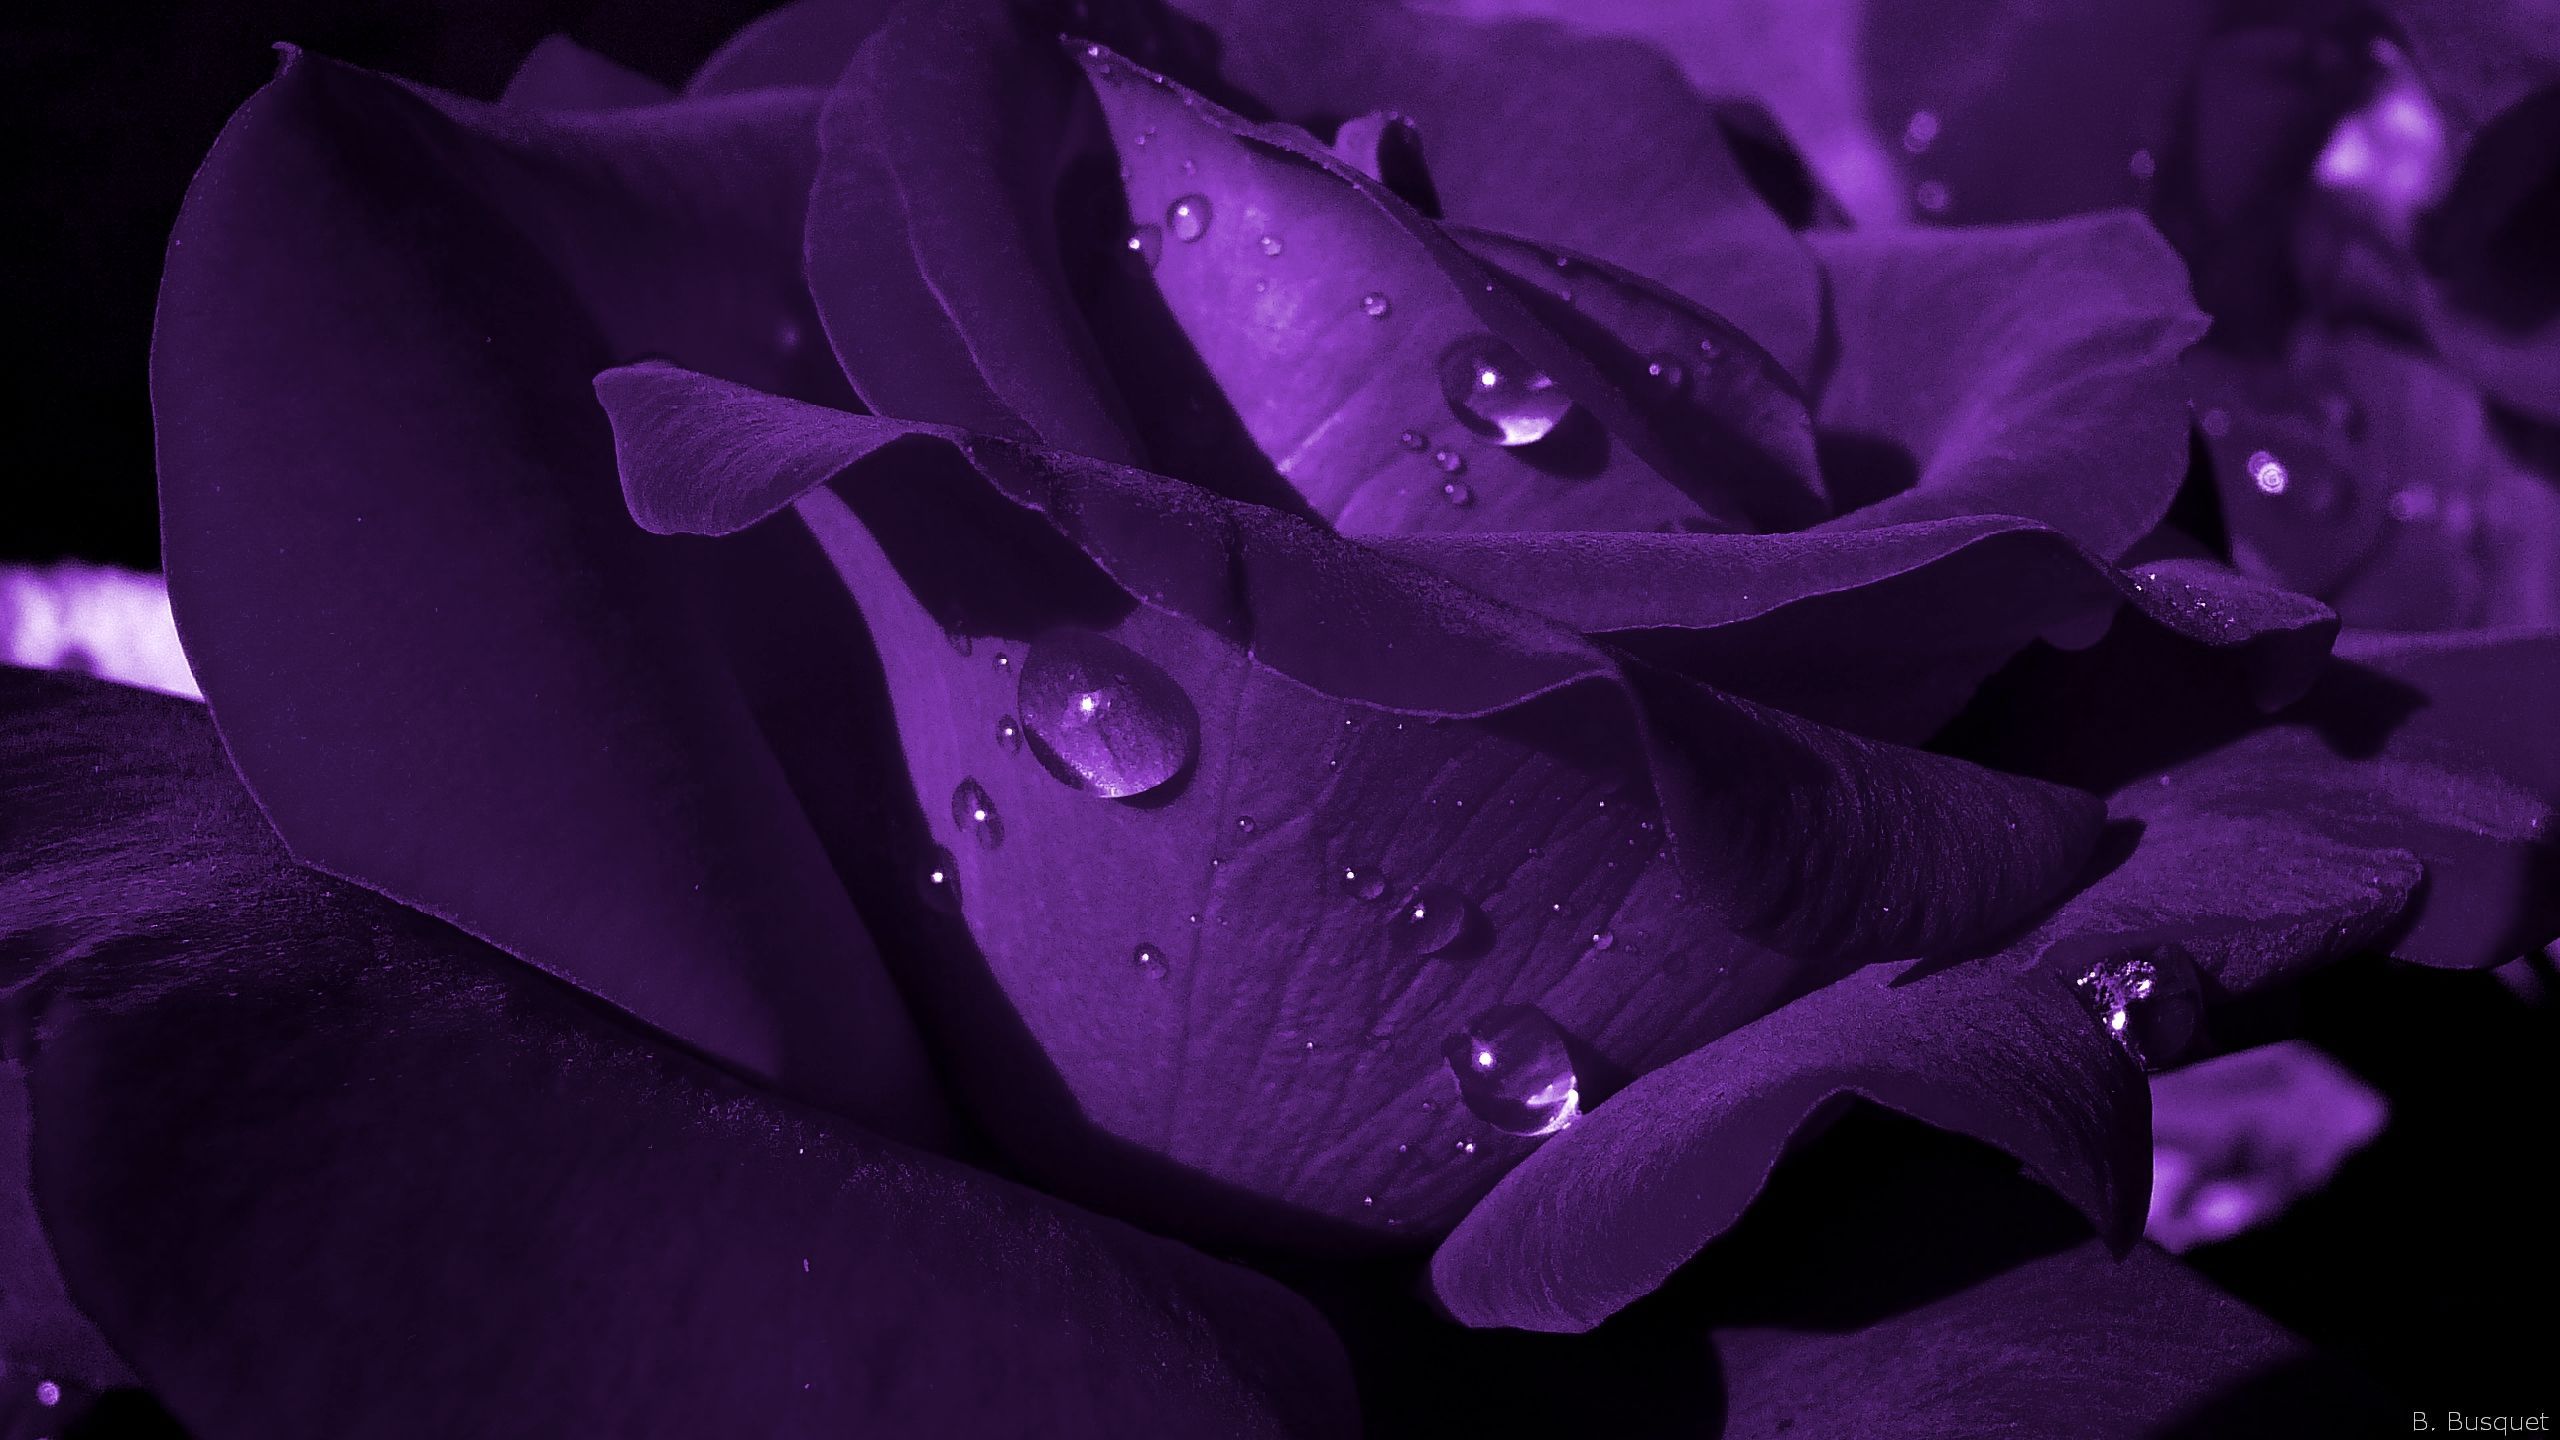 High Quality Image Collection of Purple Rose: Altti Gooderson